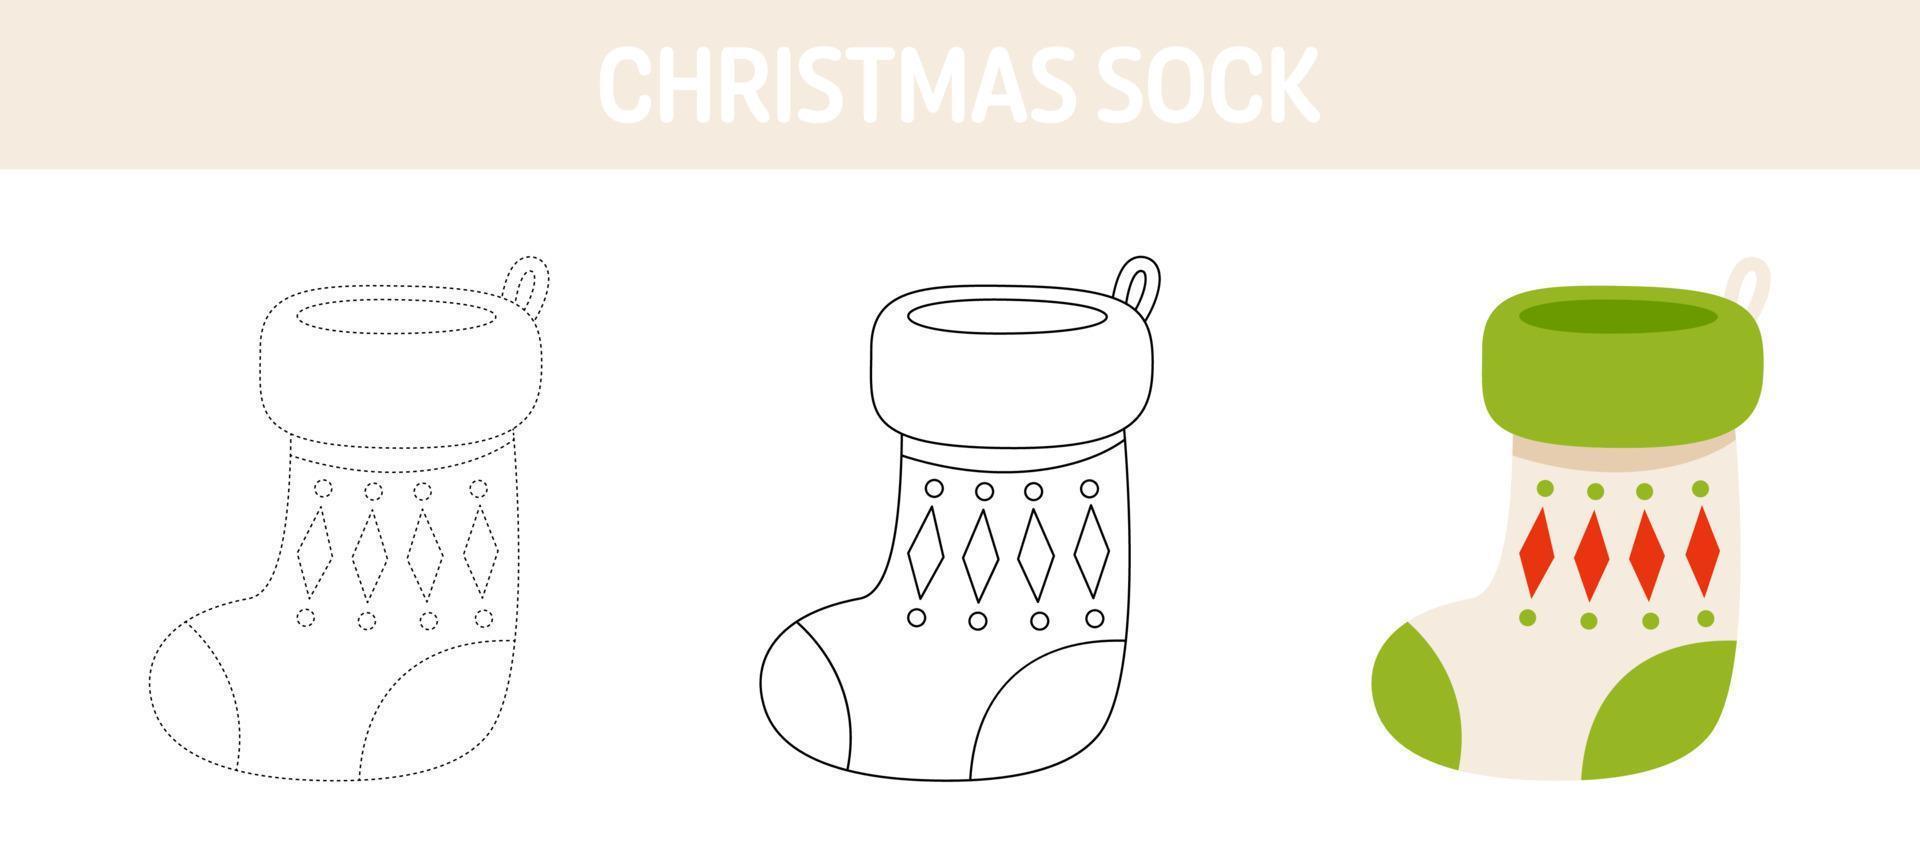 Christmas Sock tracing and coloring worksheet for kids vector